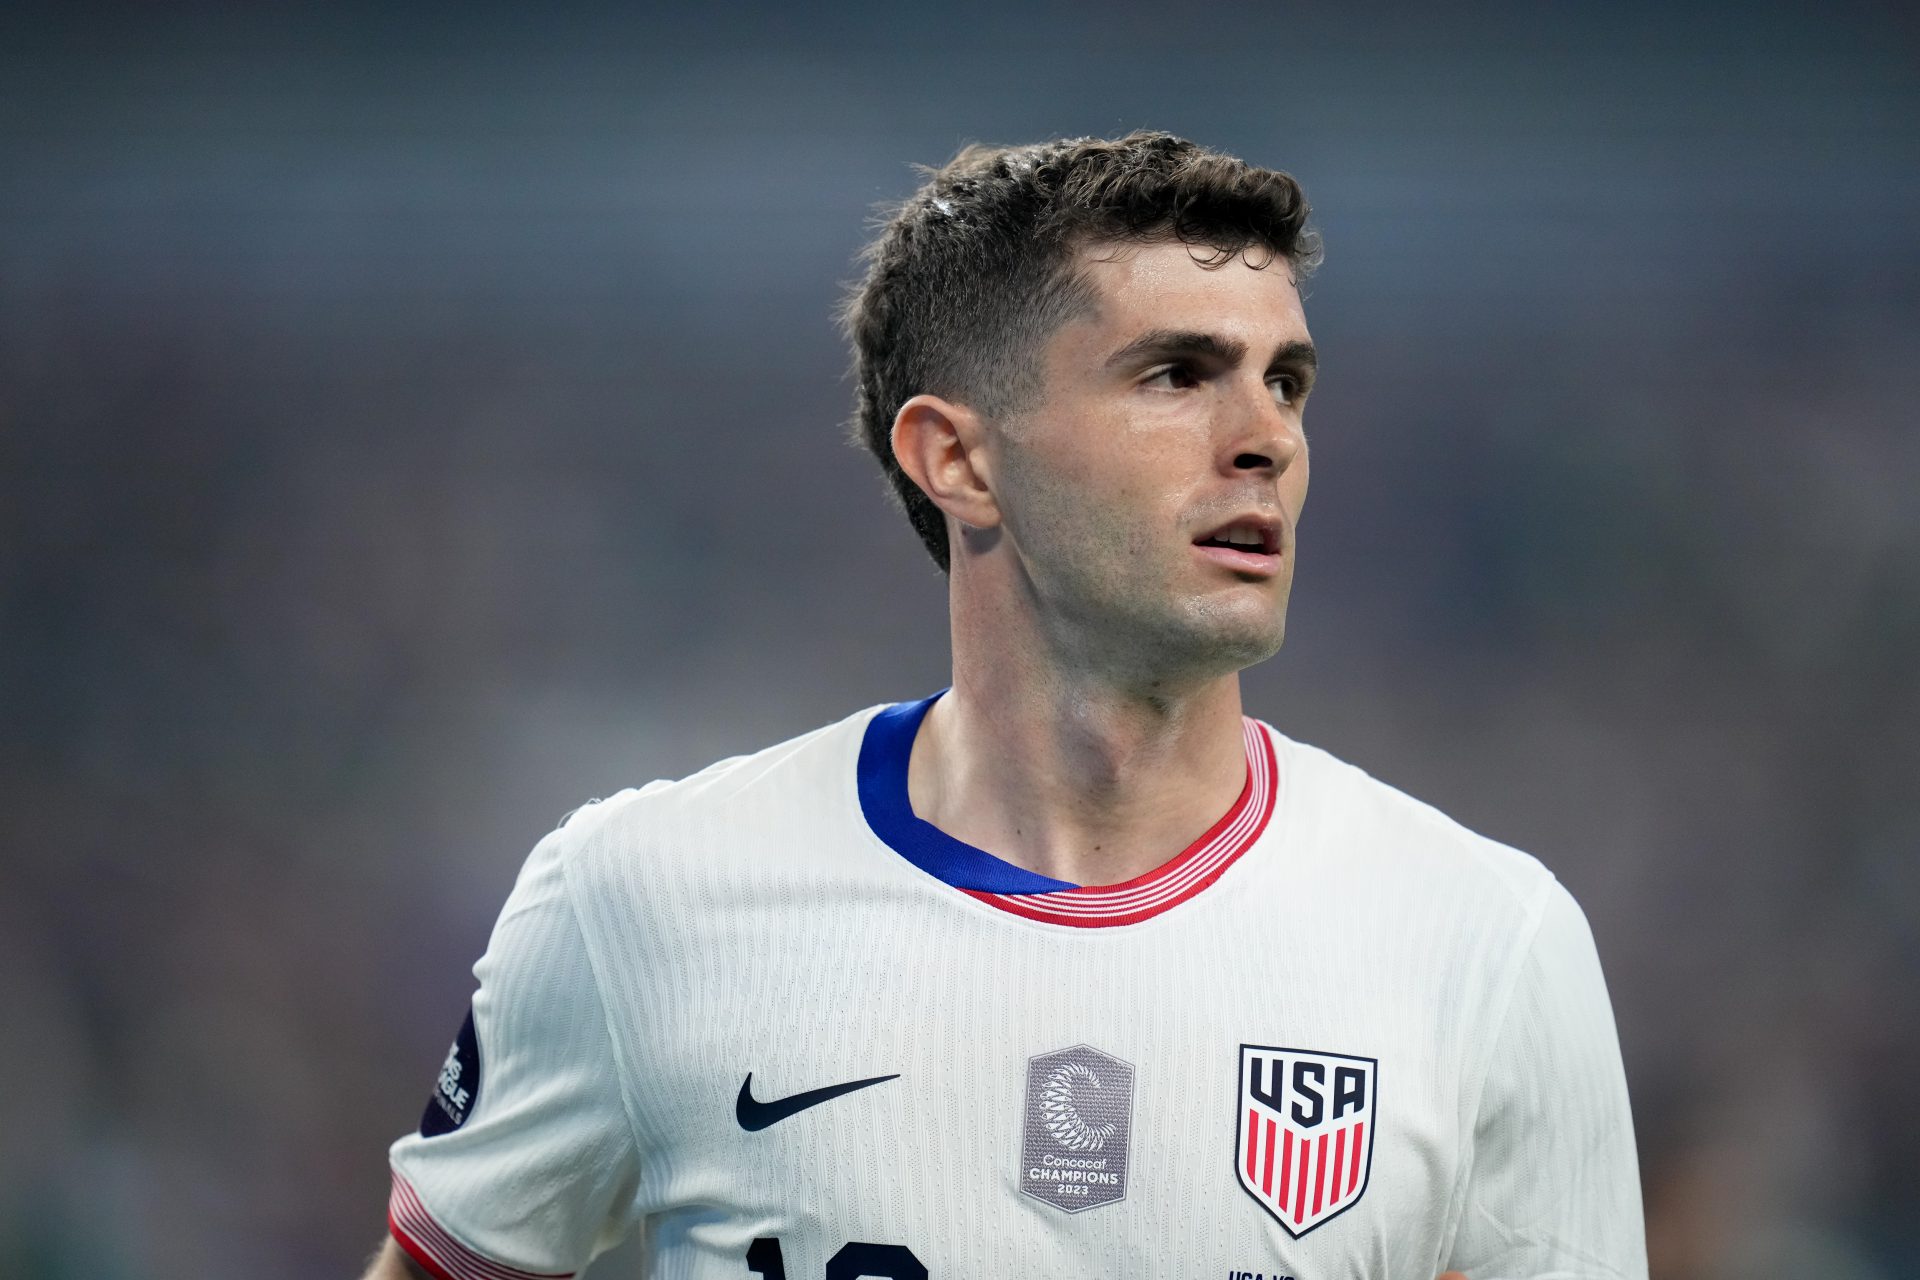 'Why aren’t you over there with them!?': Christian Pulisic's Copa America outrage